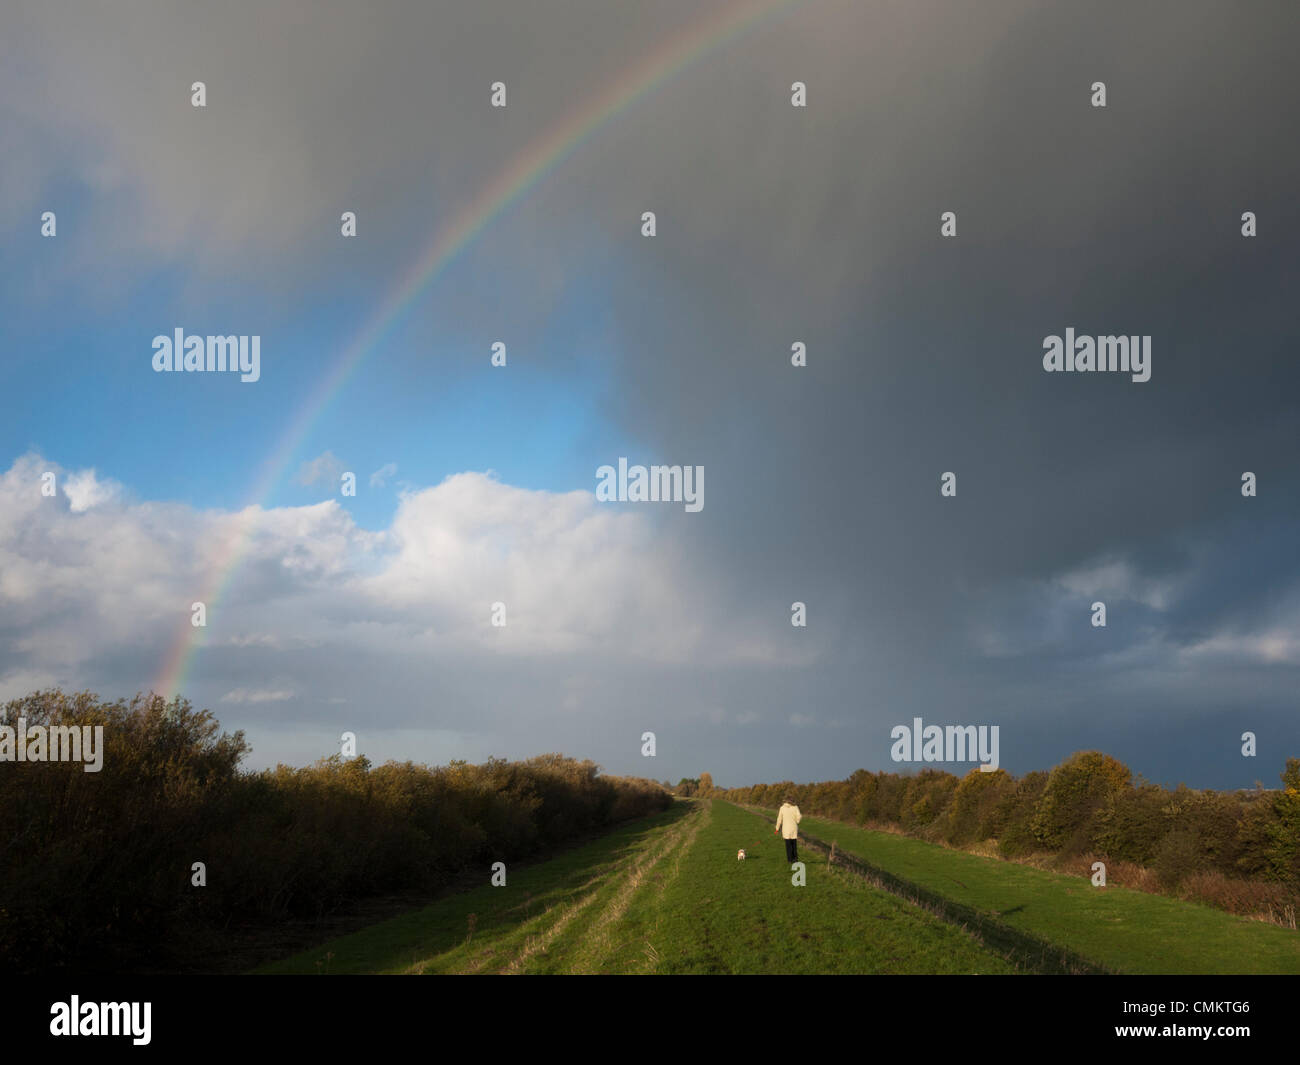 Over, Cambridgeshire, UK. 3rd Nov, 2013. A woman walks a dog under stormy Fen skies and a rainbow on the flood banks at Over in Cambridgeshire UK  3rd November 2013. It was a blustery but sunny day with occasional showers, dramatic under the wide open Fen skies. Credit Julian Eales/Alamy Live News Stock Photo